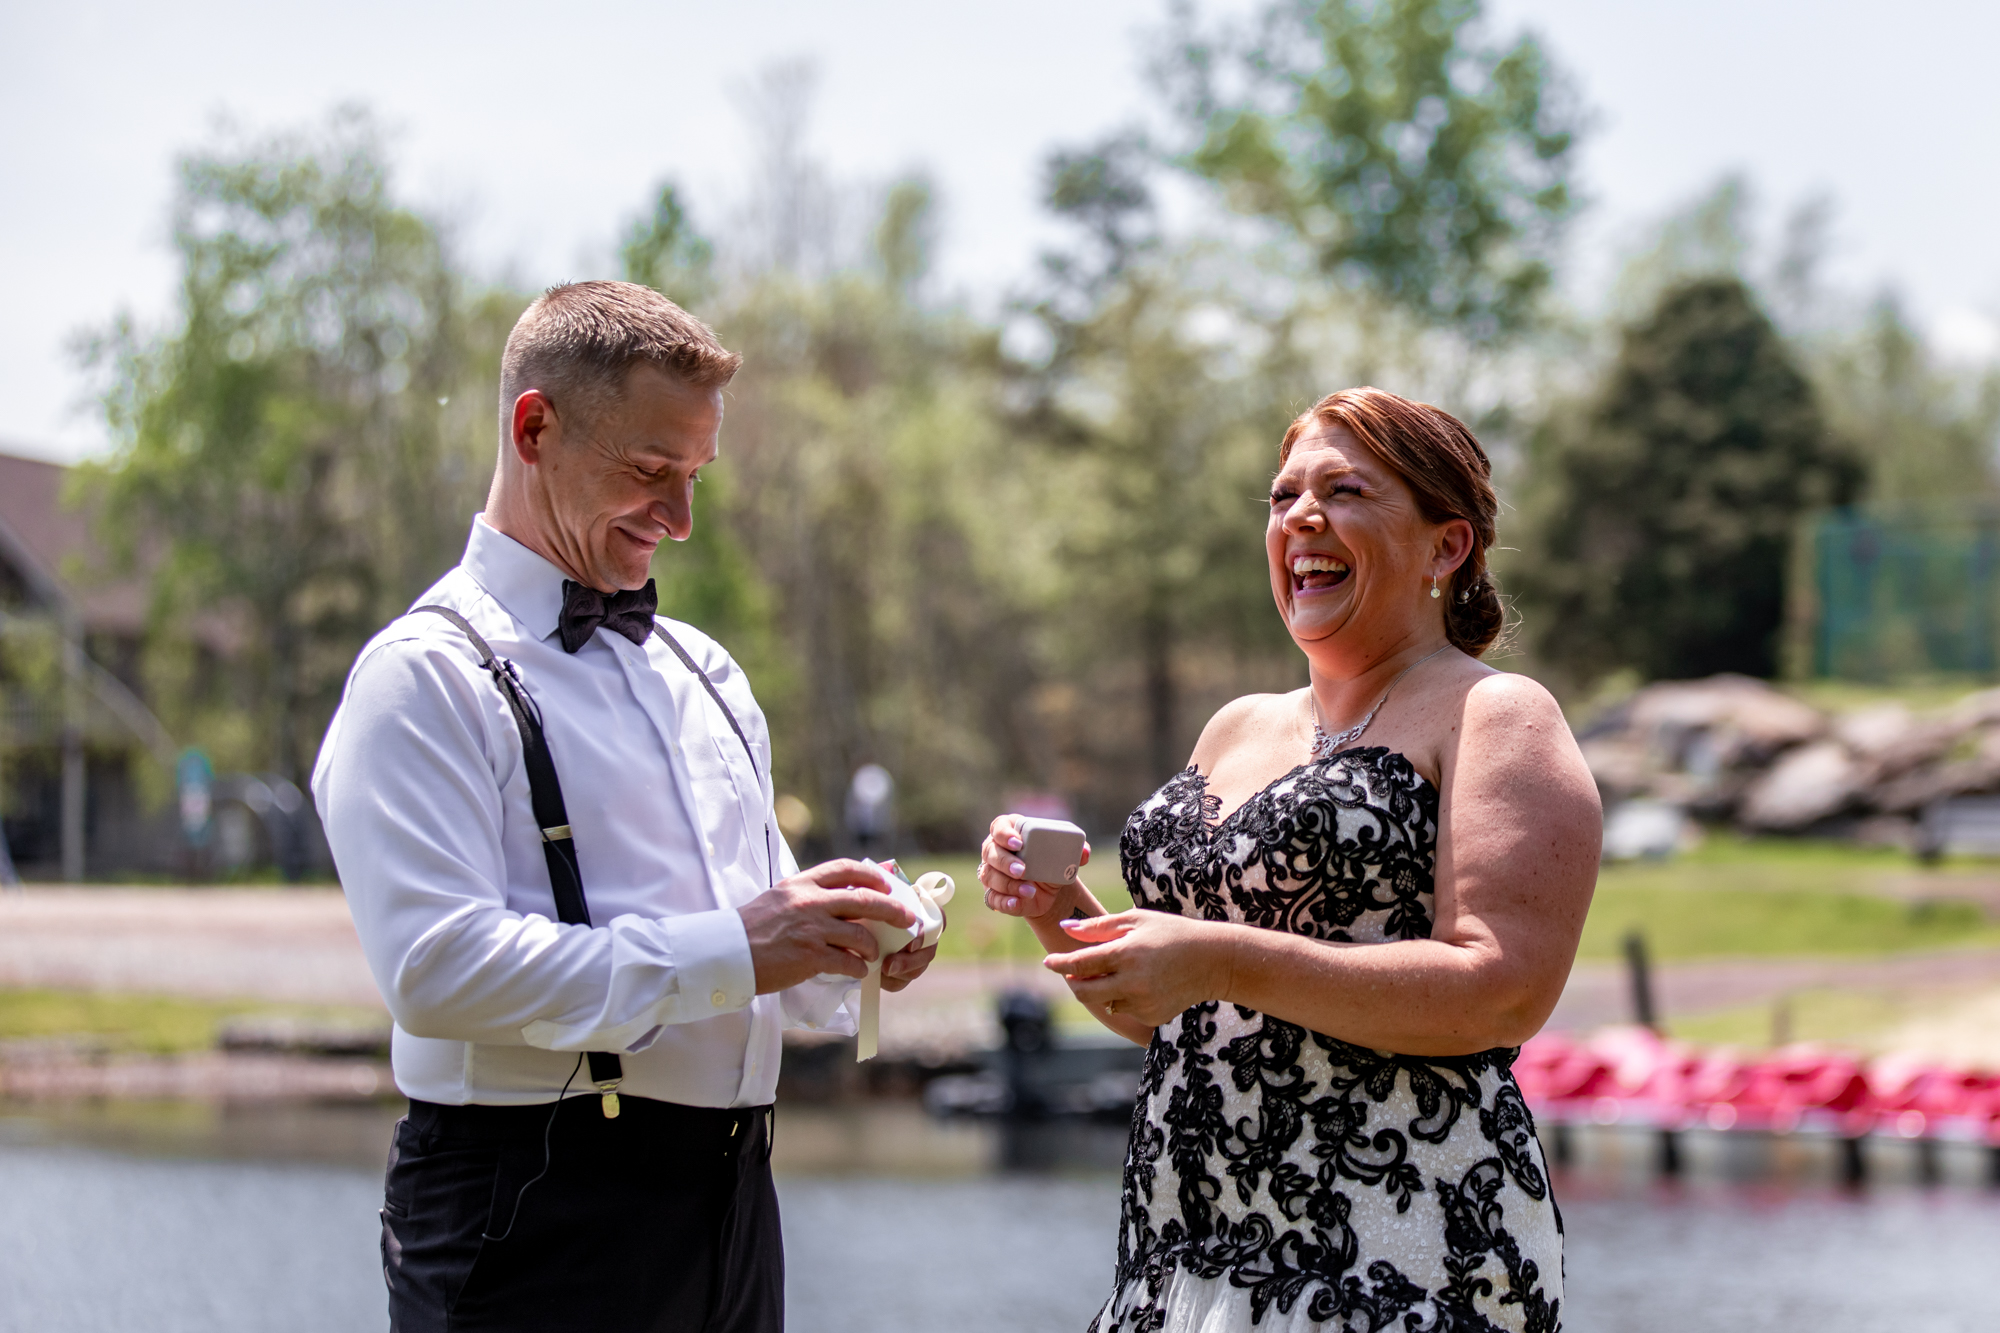 first look on a wedding day by a lake in the poconos